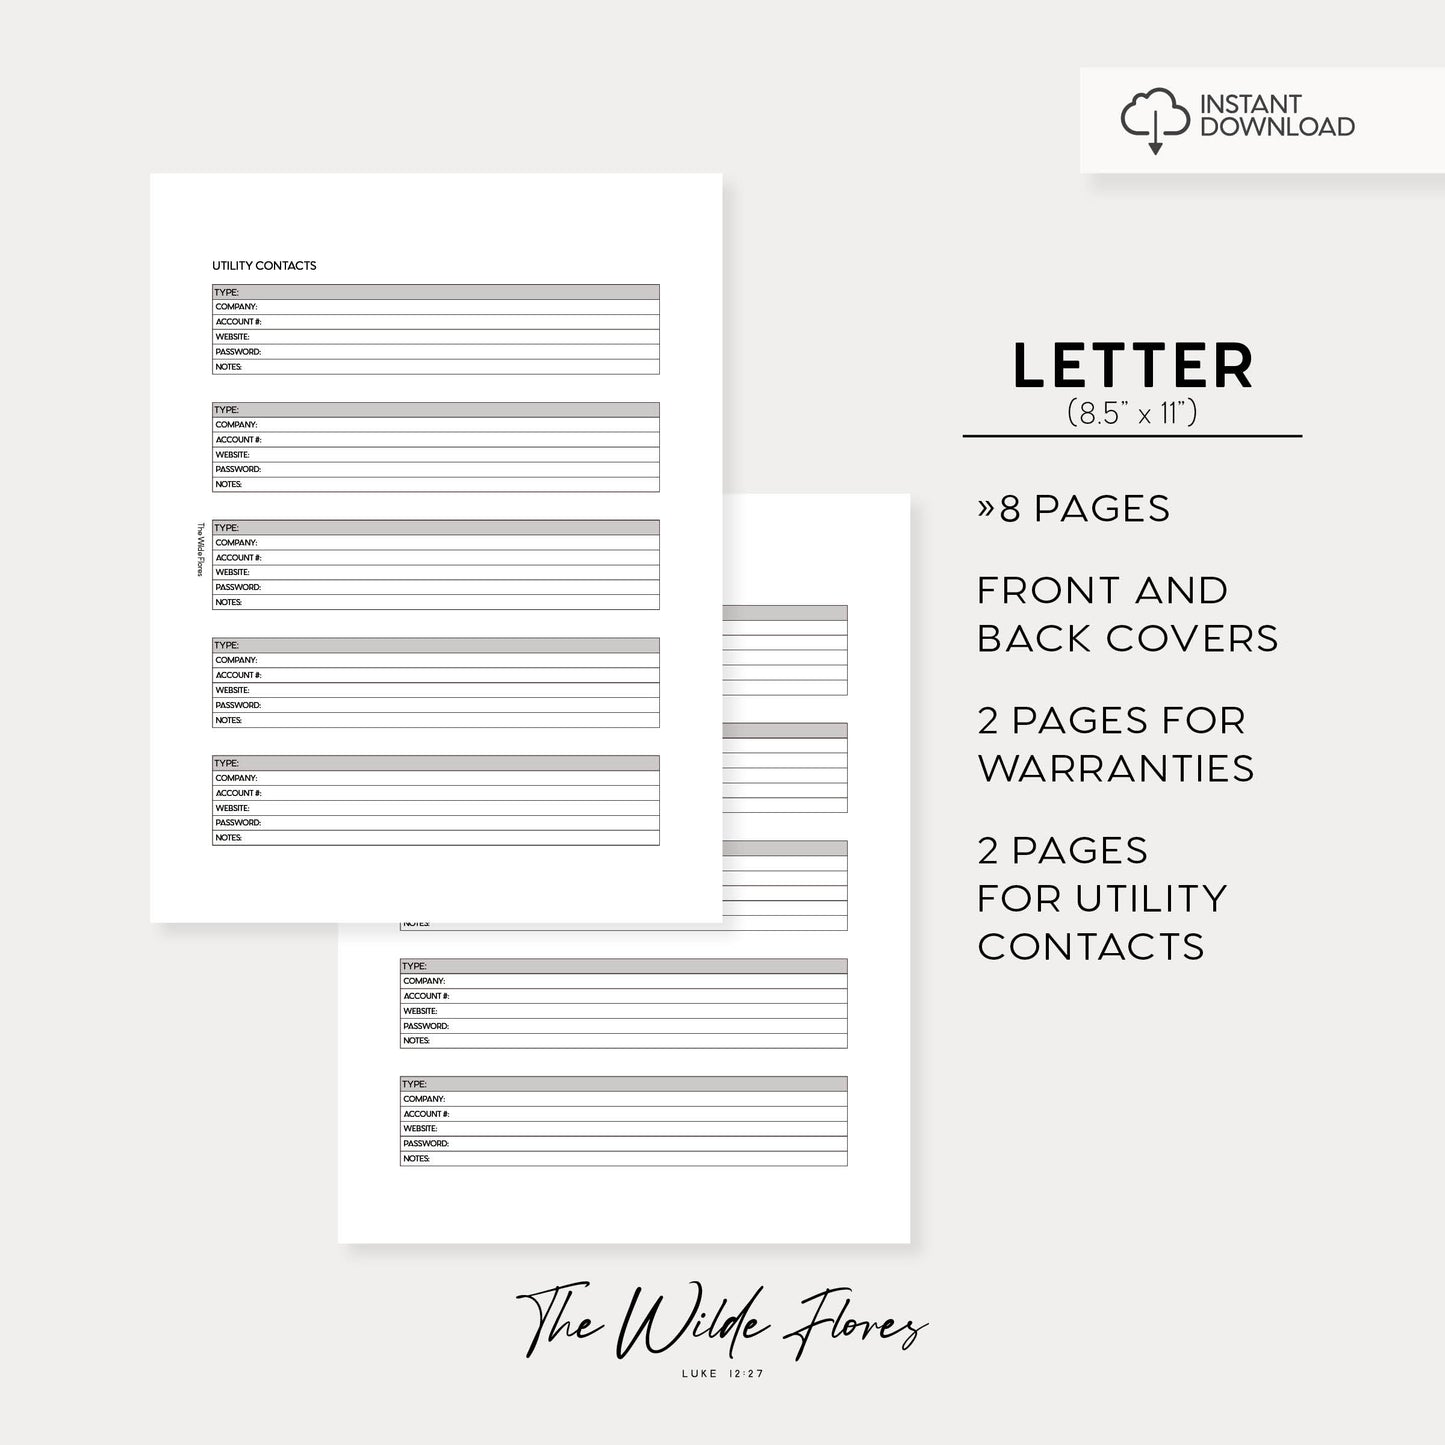 Warranties and Utilities Log: Letter Size Printable